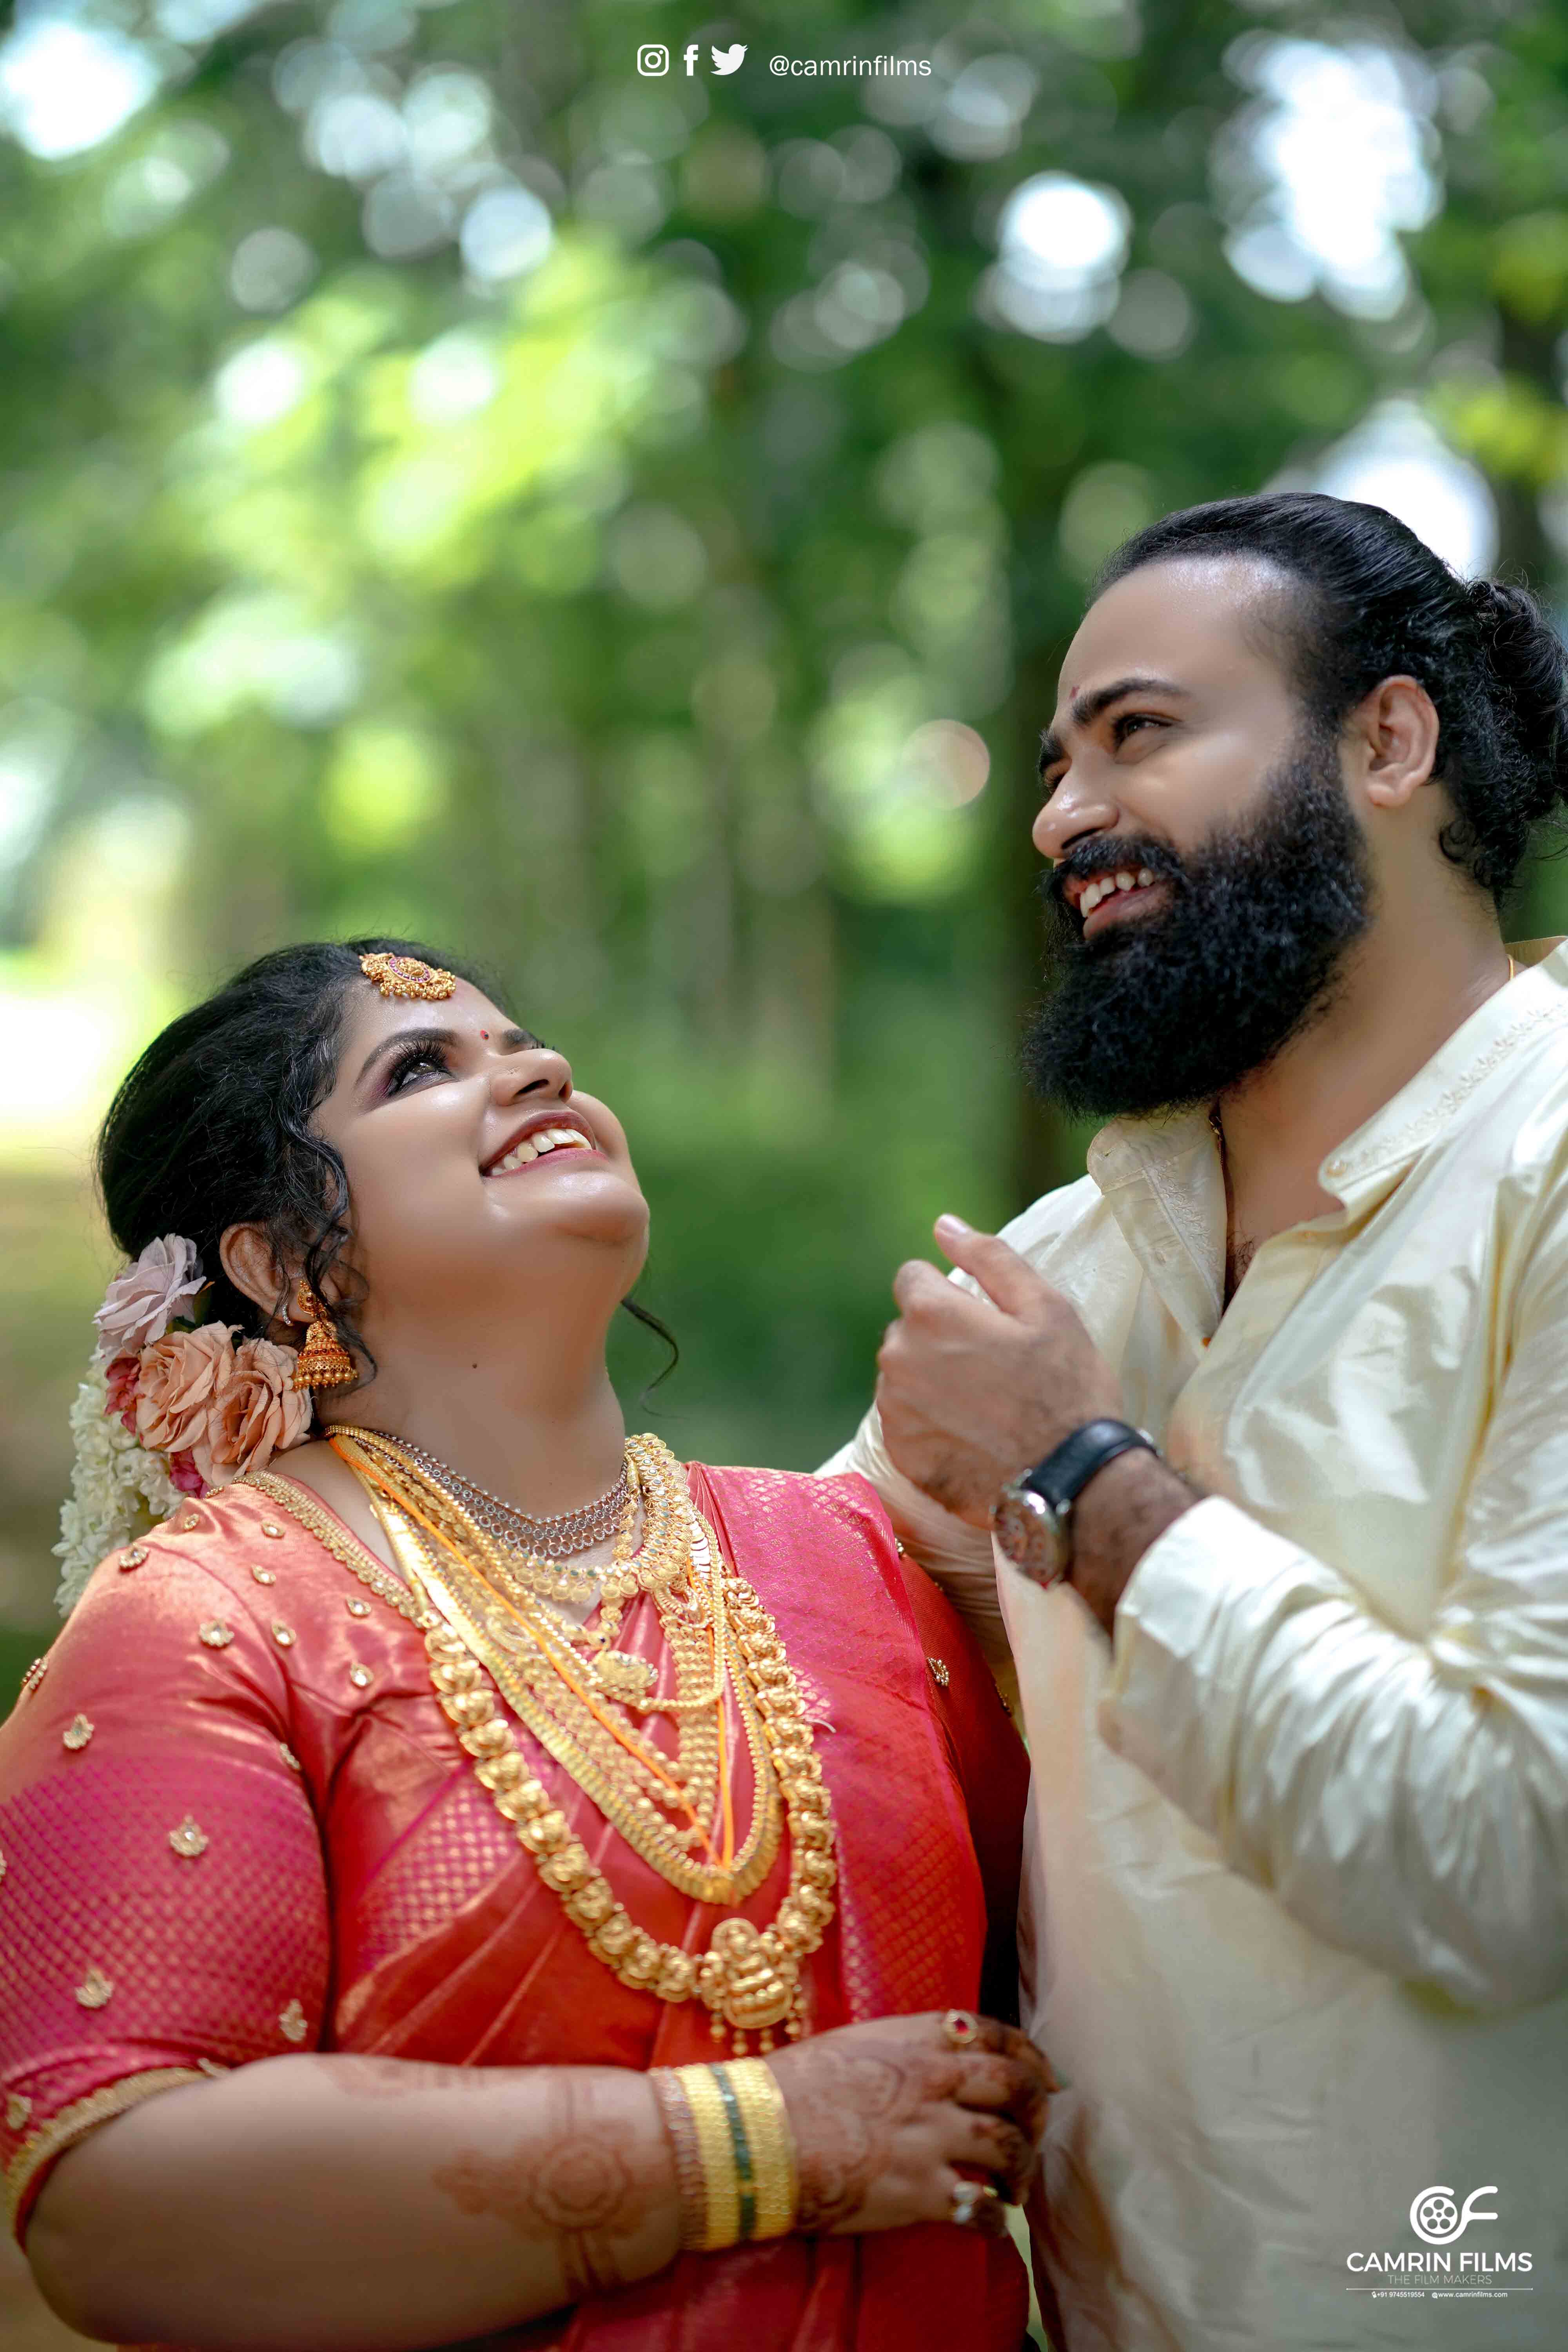 Hindu and Indian wedding guide | All about Hindu wedding photography